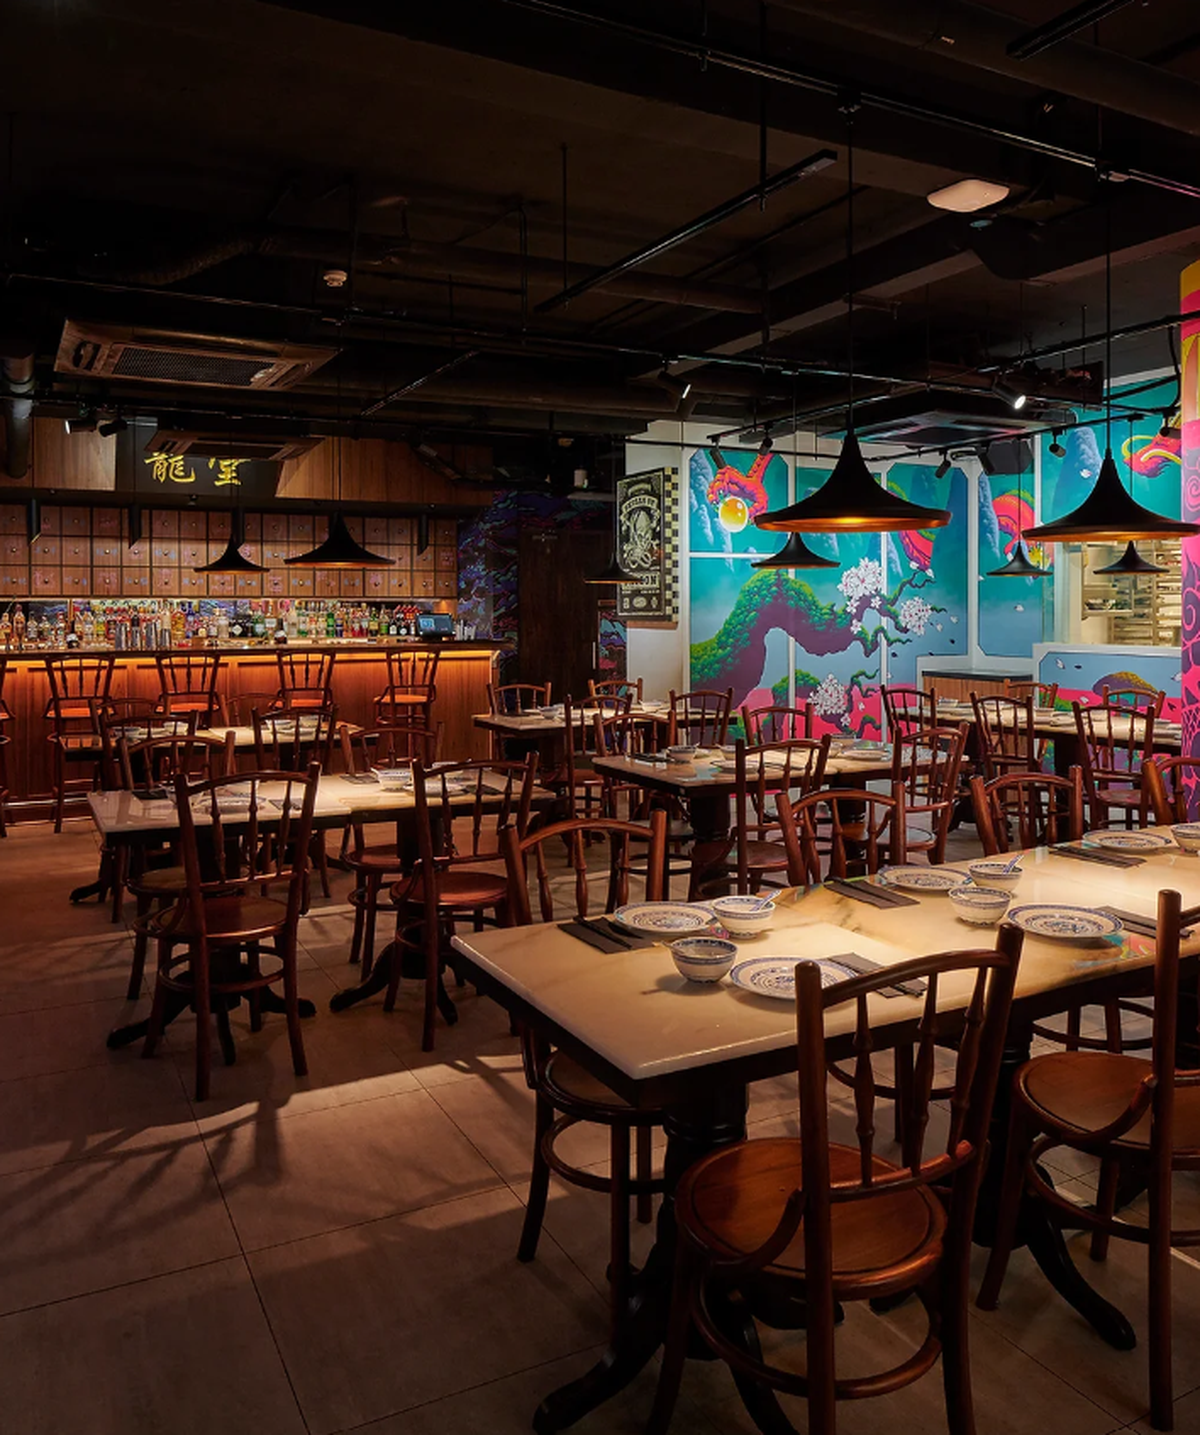 Inside the restaurant, with its wallpapers that give a hat-tip to The Dragon Ball comic book